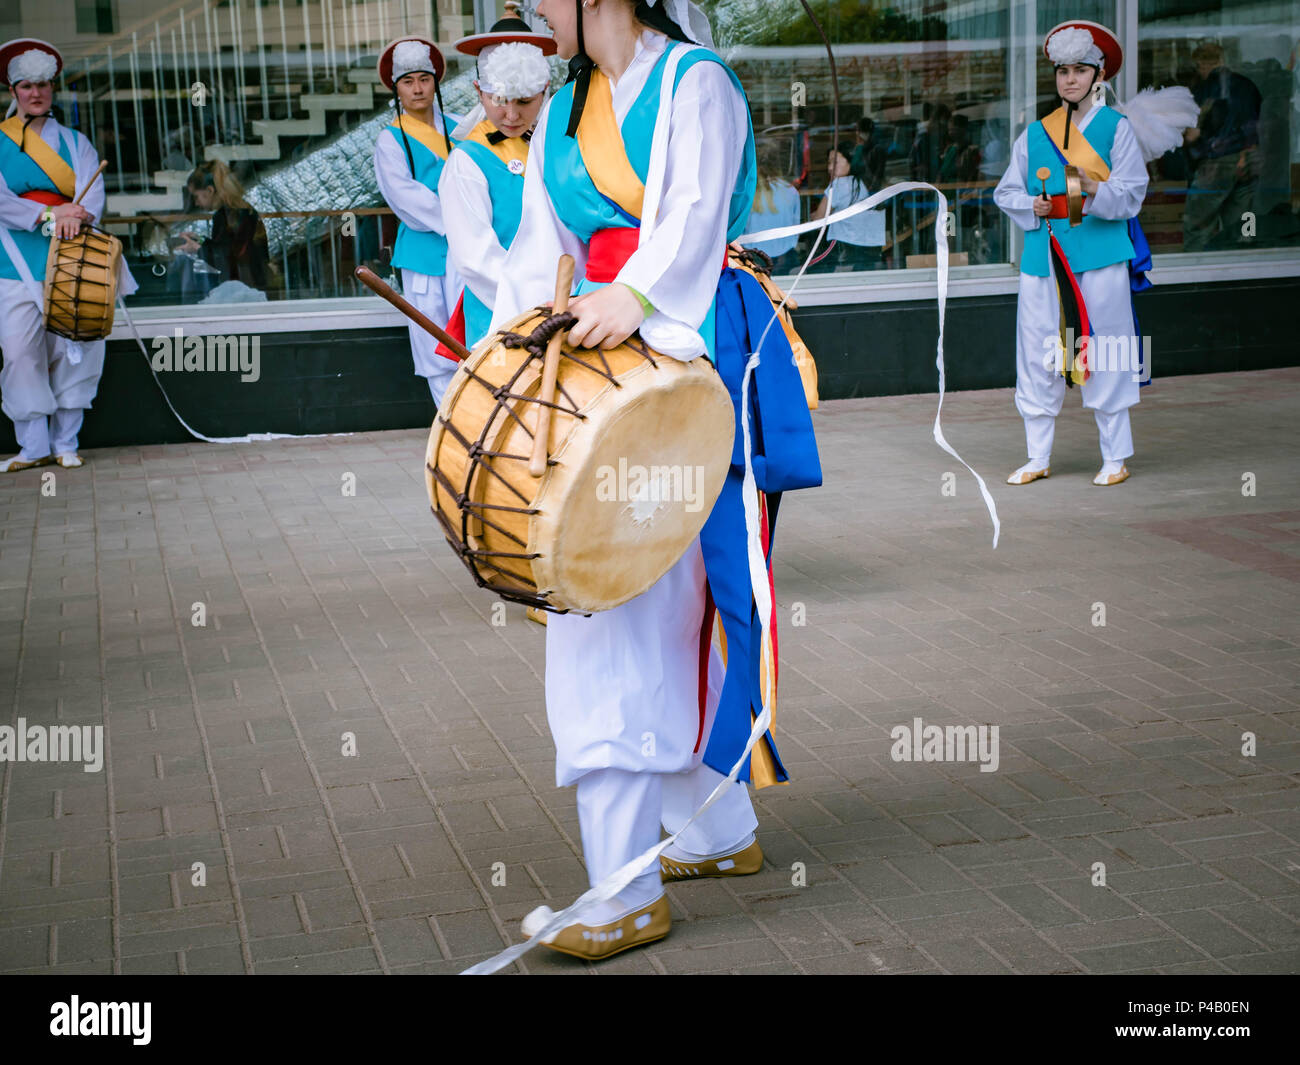 Moscow, Russia, July 12, 2018: Korean traditional musical instruments. A group of musicians and dancers in bright colored suits perform traditional Ko Stock Photo